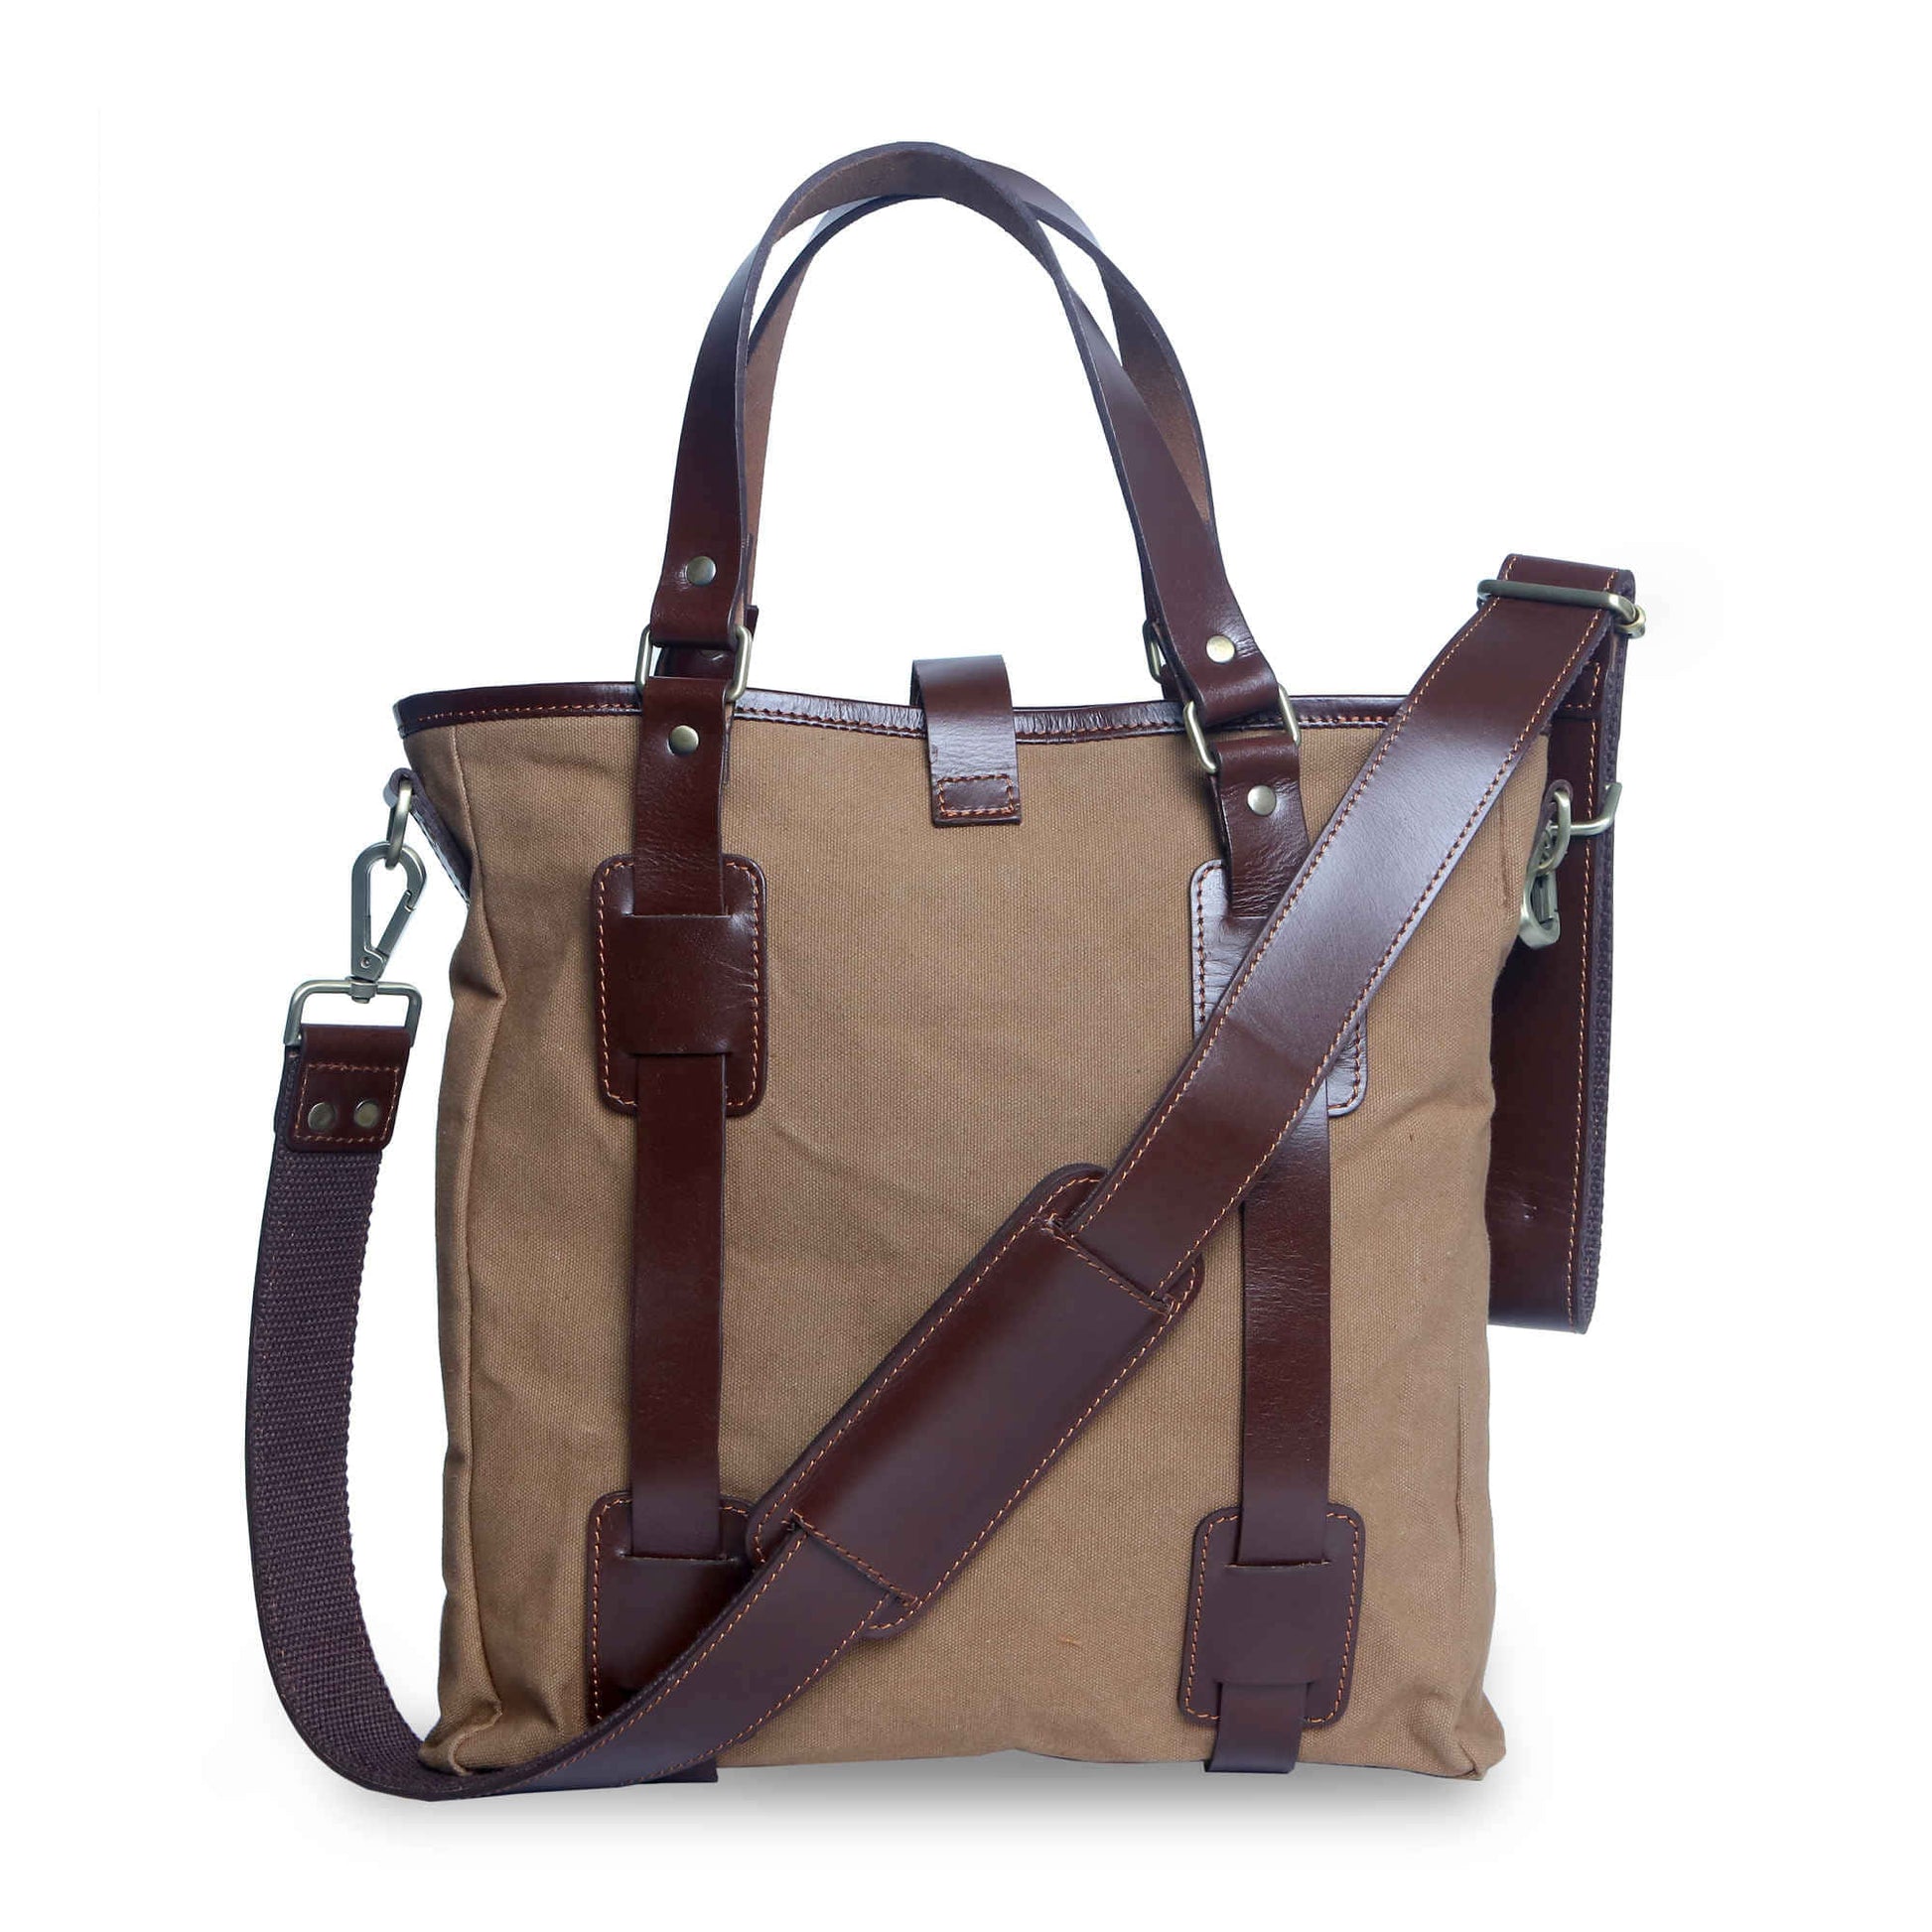 Style n Craft 39003 Unisex Tote Bag in Brown Waterproof Canvas and Full Grain Leather Combination - Back View